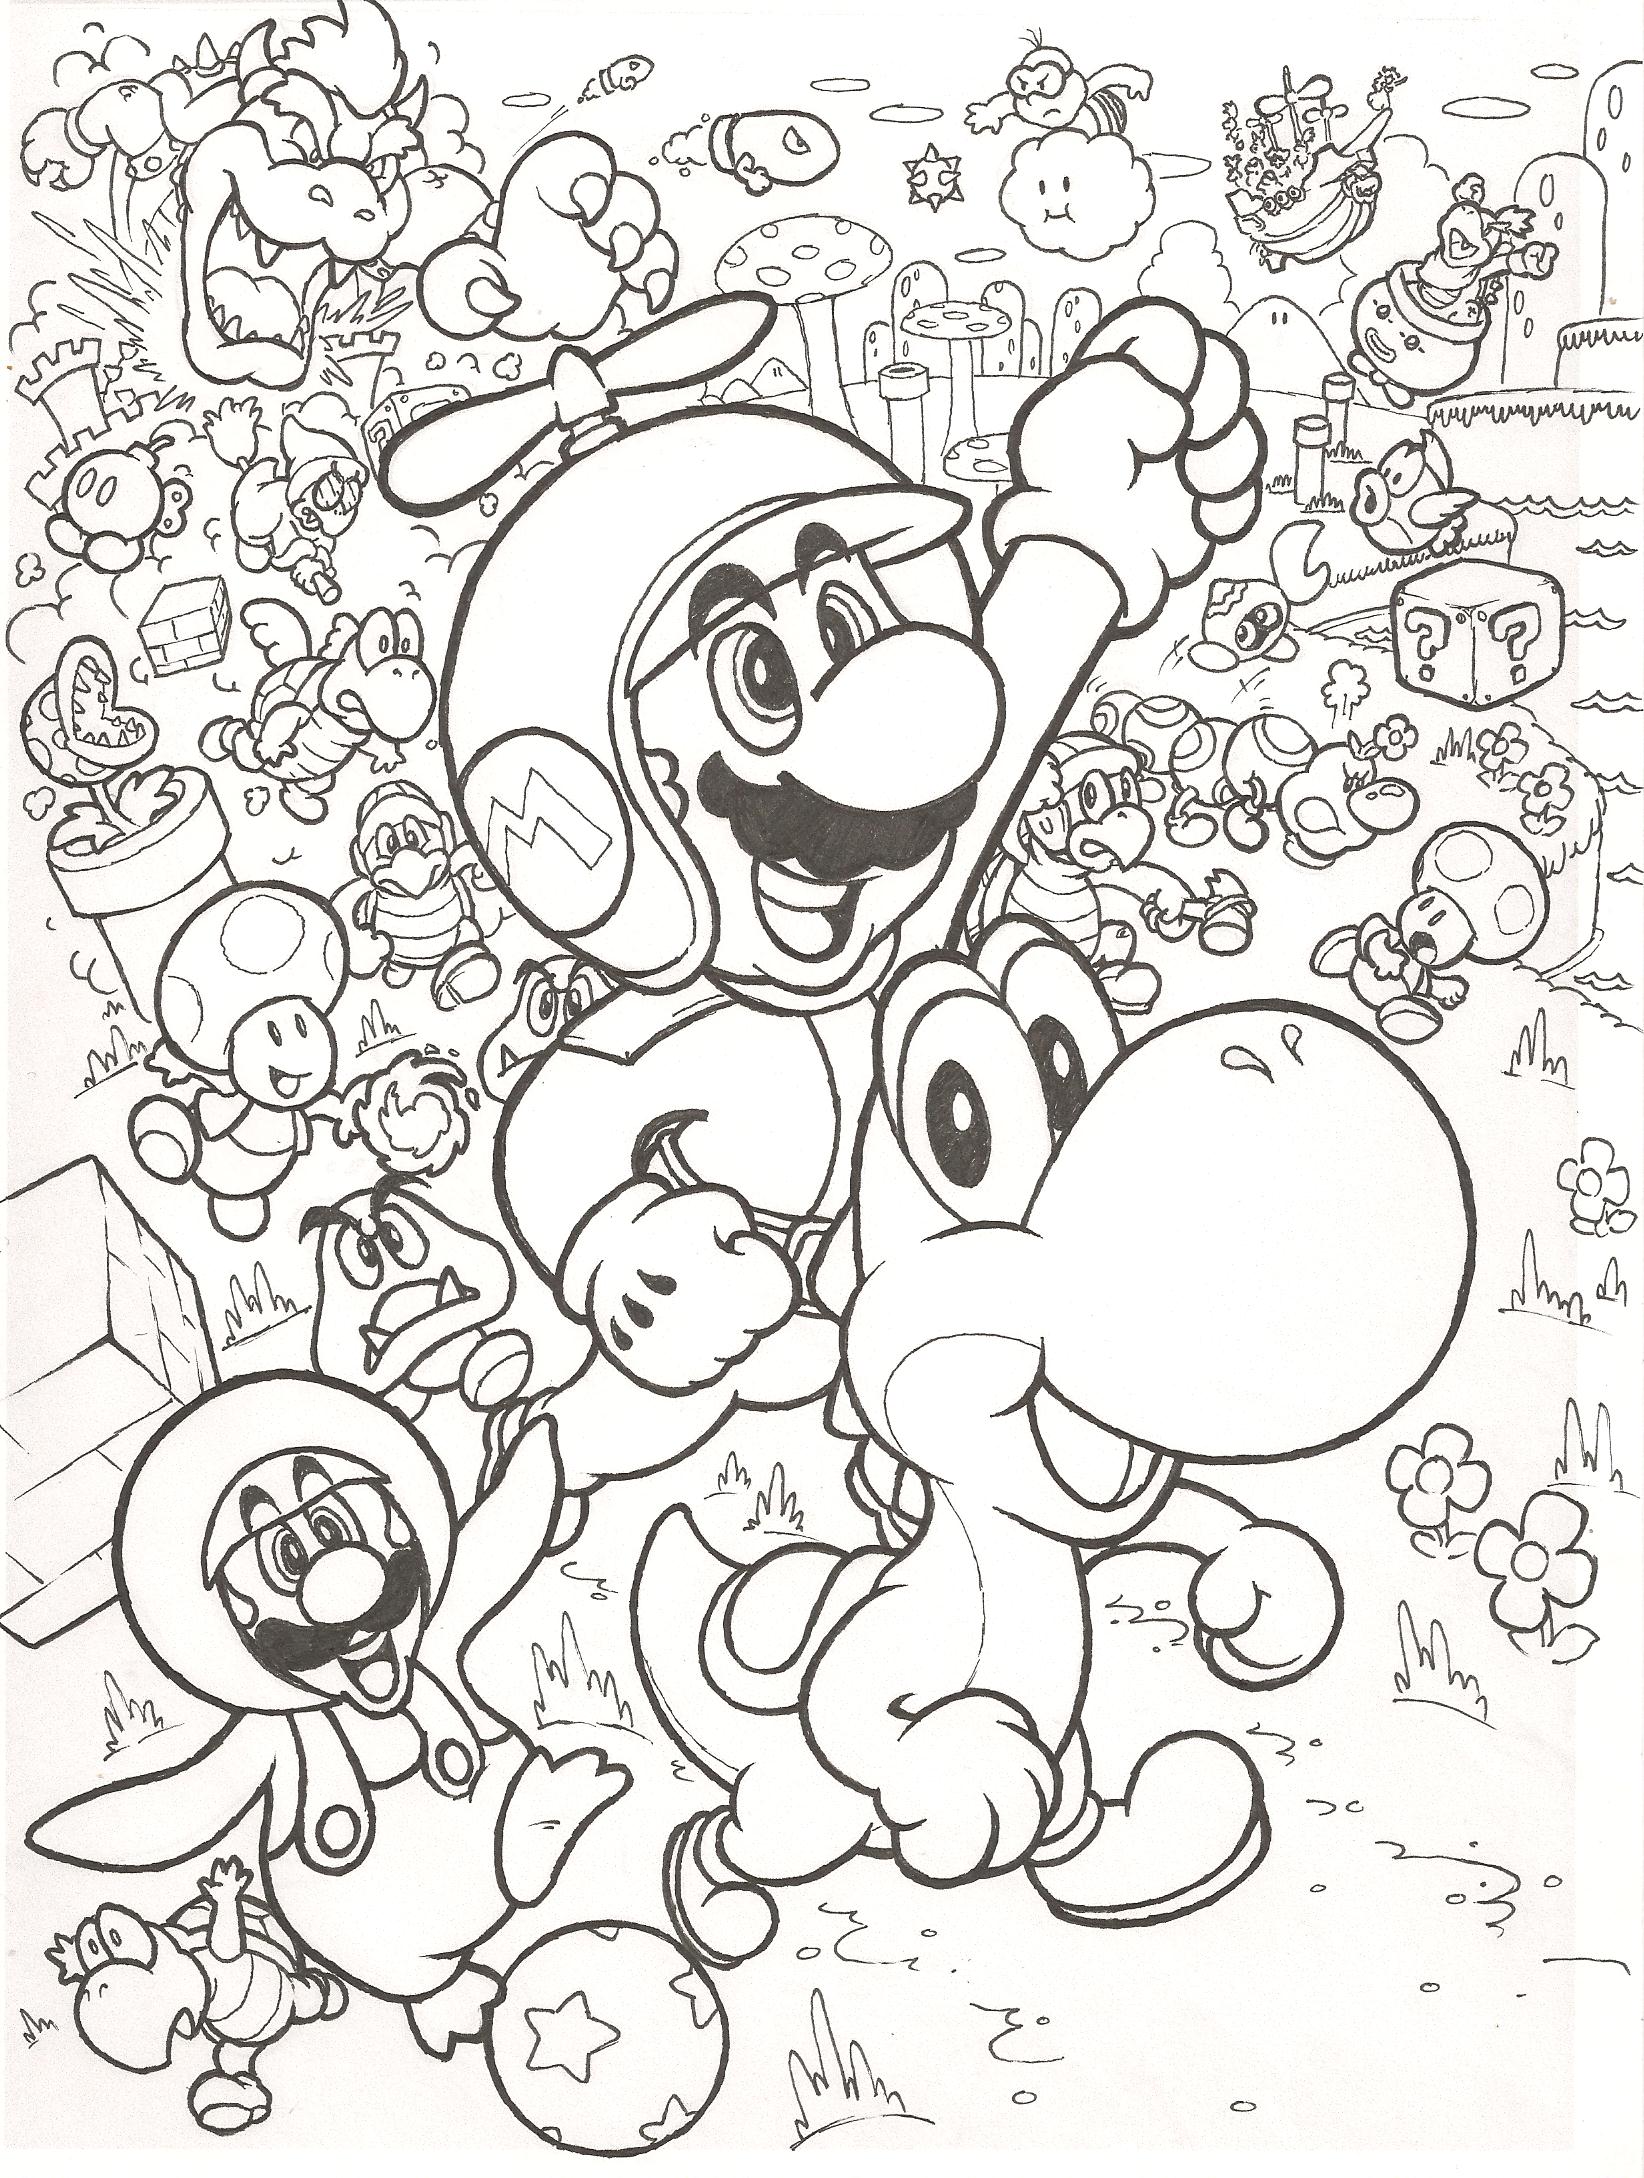 3Ds Super Smash Bros Coloring Pages | Coloring Pages For All Ages